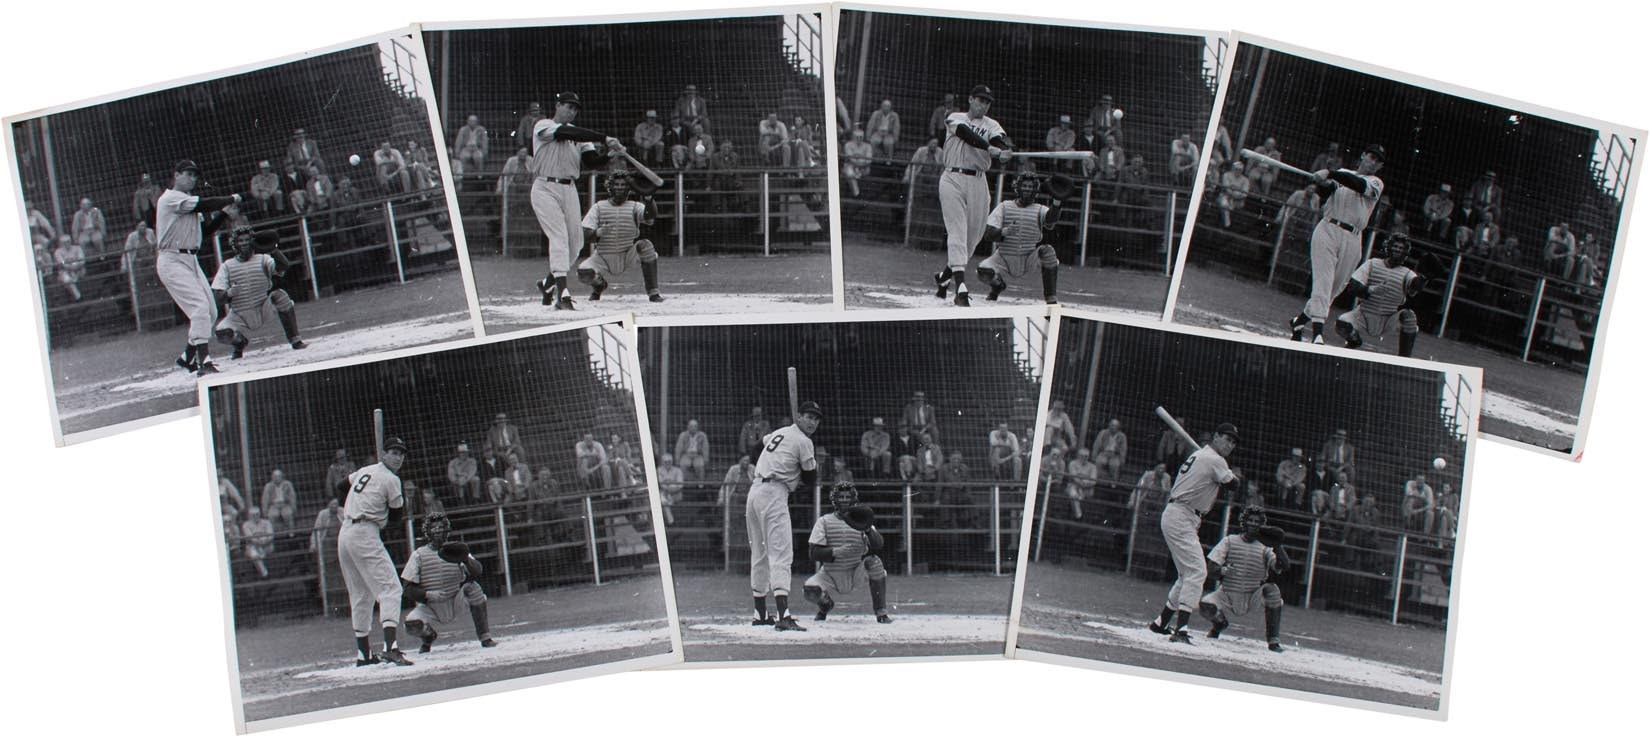 Vintage Sports Photographs - 1943 Ted Williams WWII "Stop Motion" Photo Series (7)